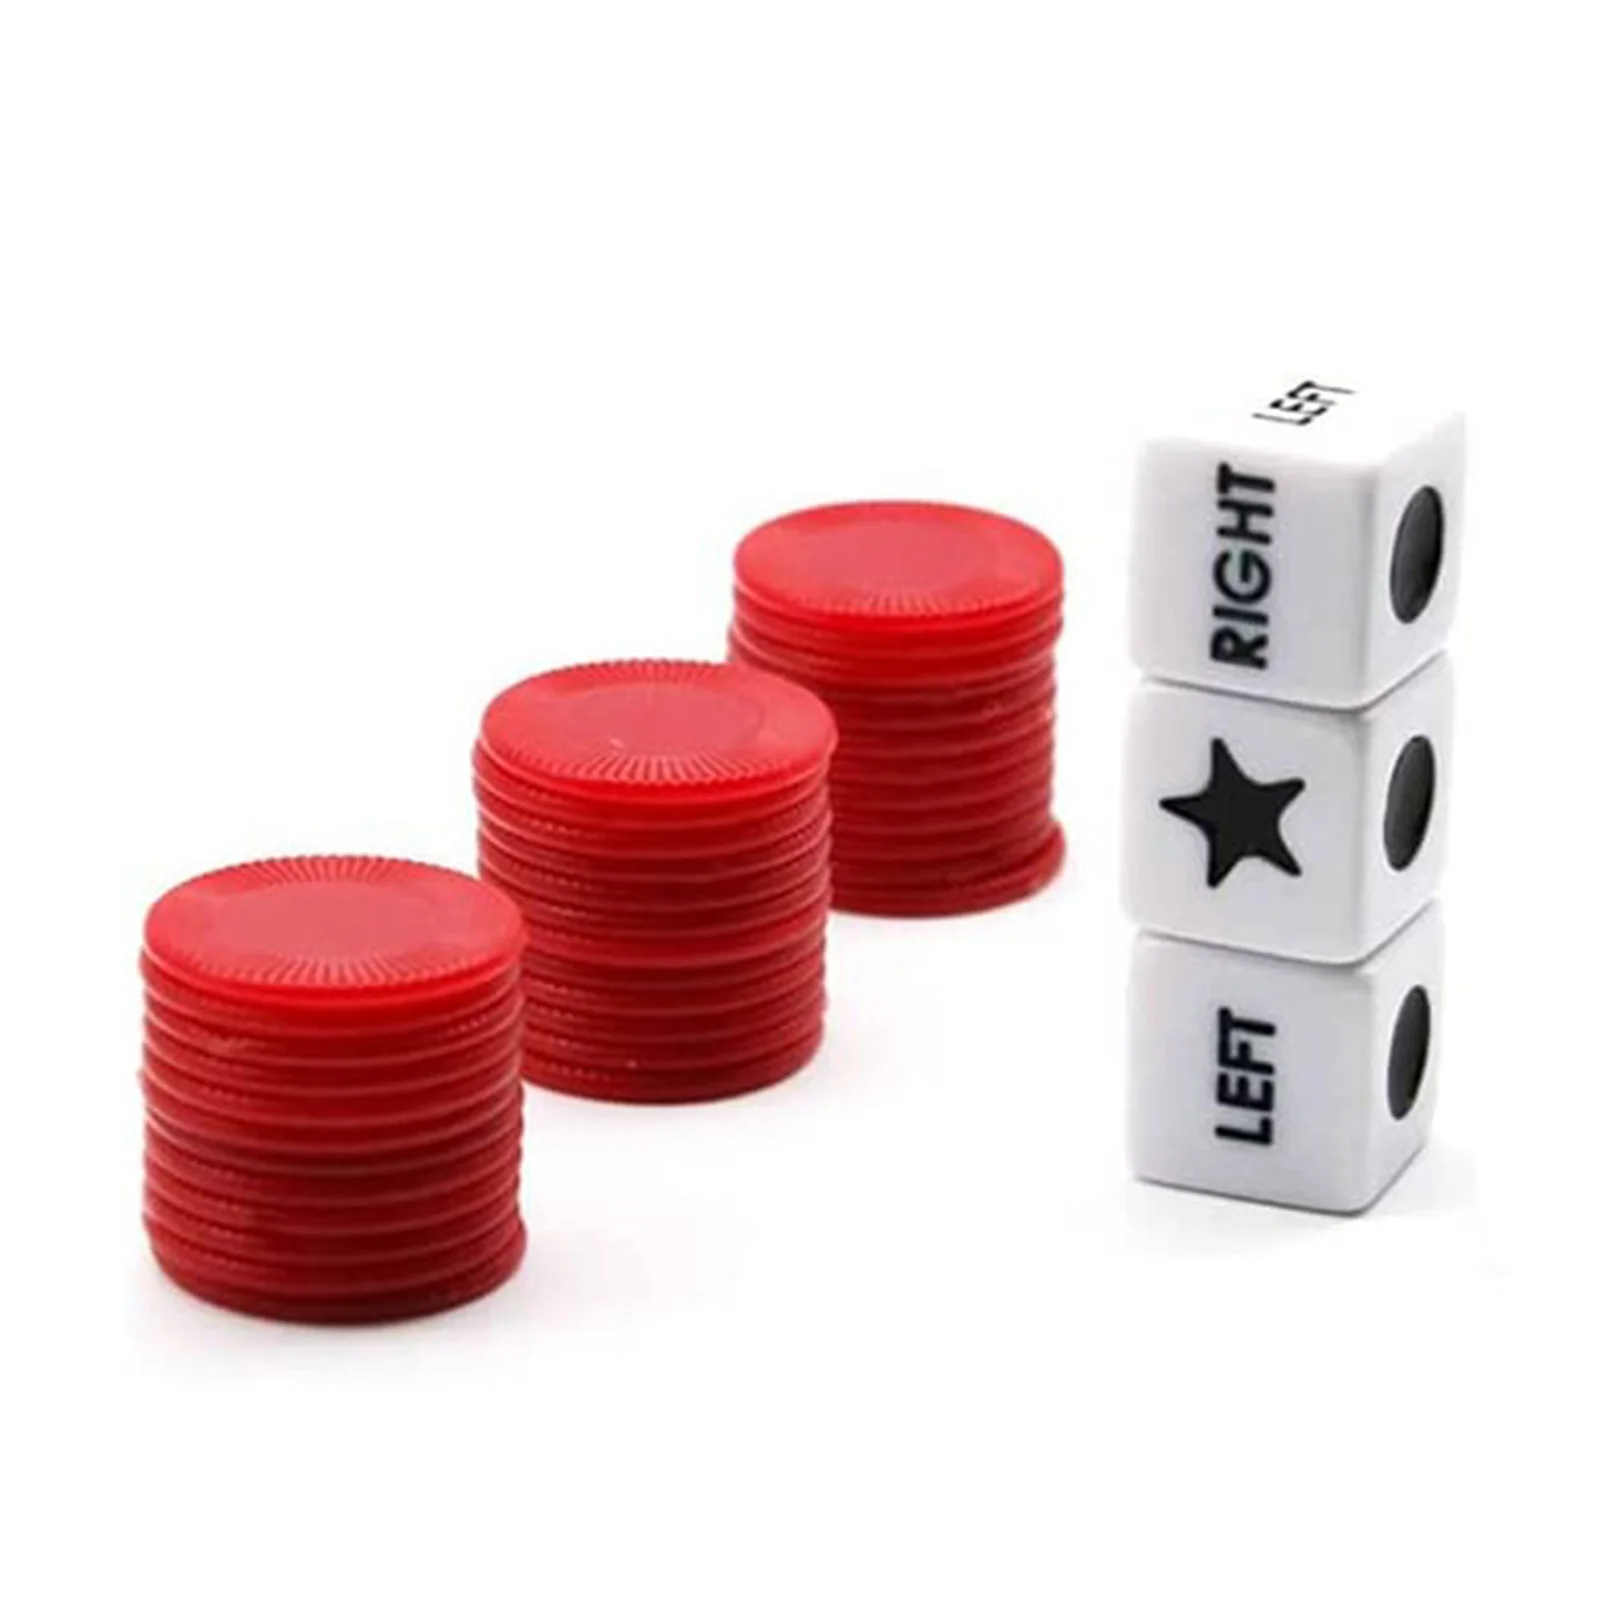 

Left Right Center Dice Game Innovative Left Right Center Game With 3 Dices And 24 Random Color Chips For Family Nights Friends